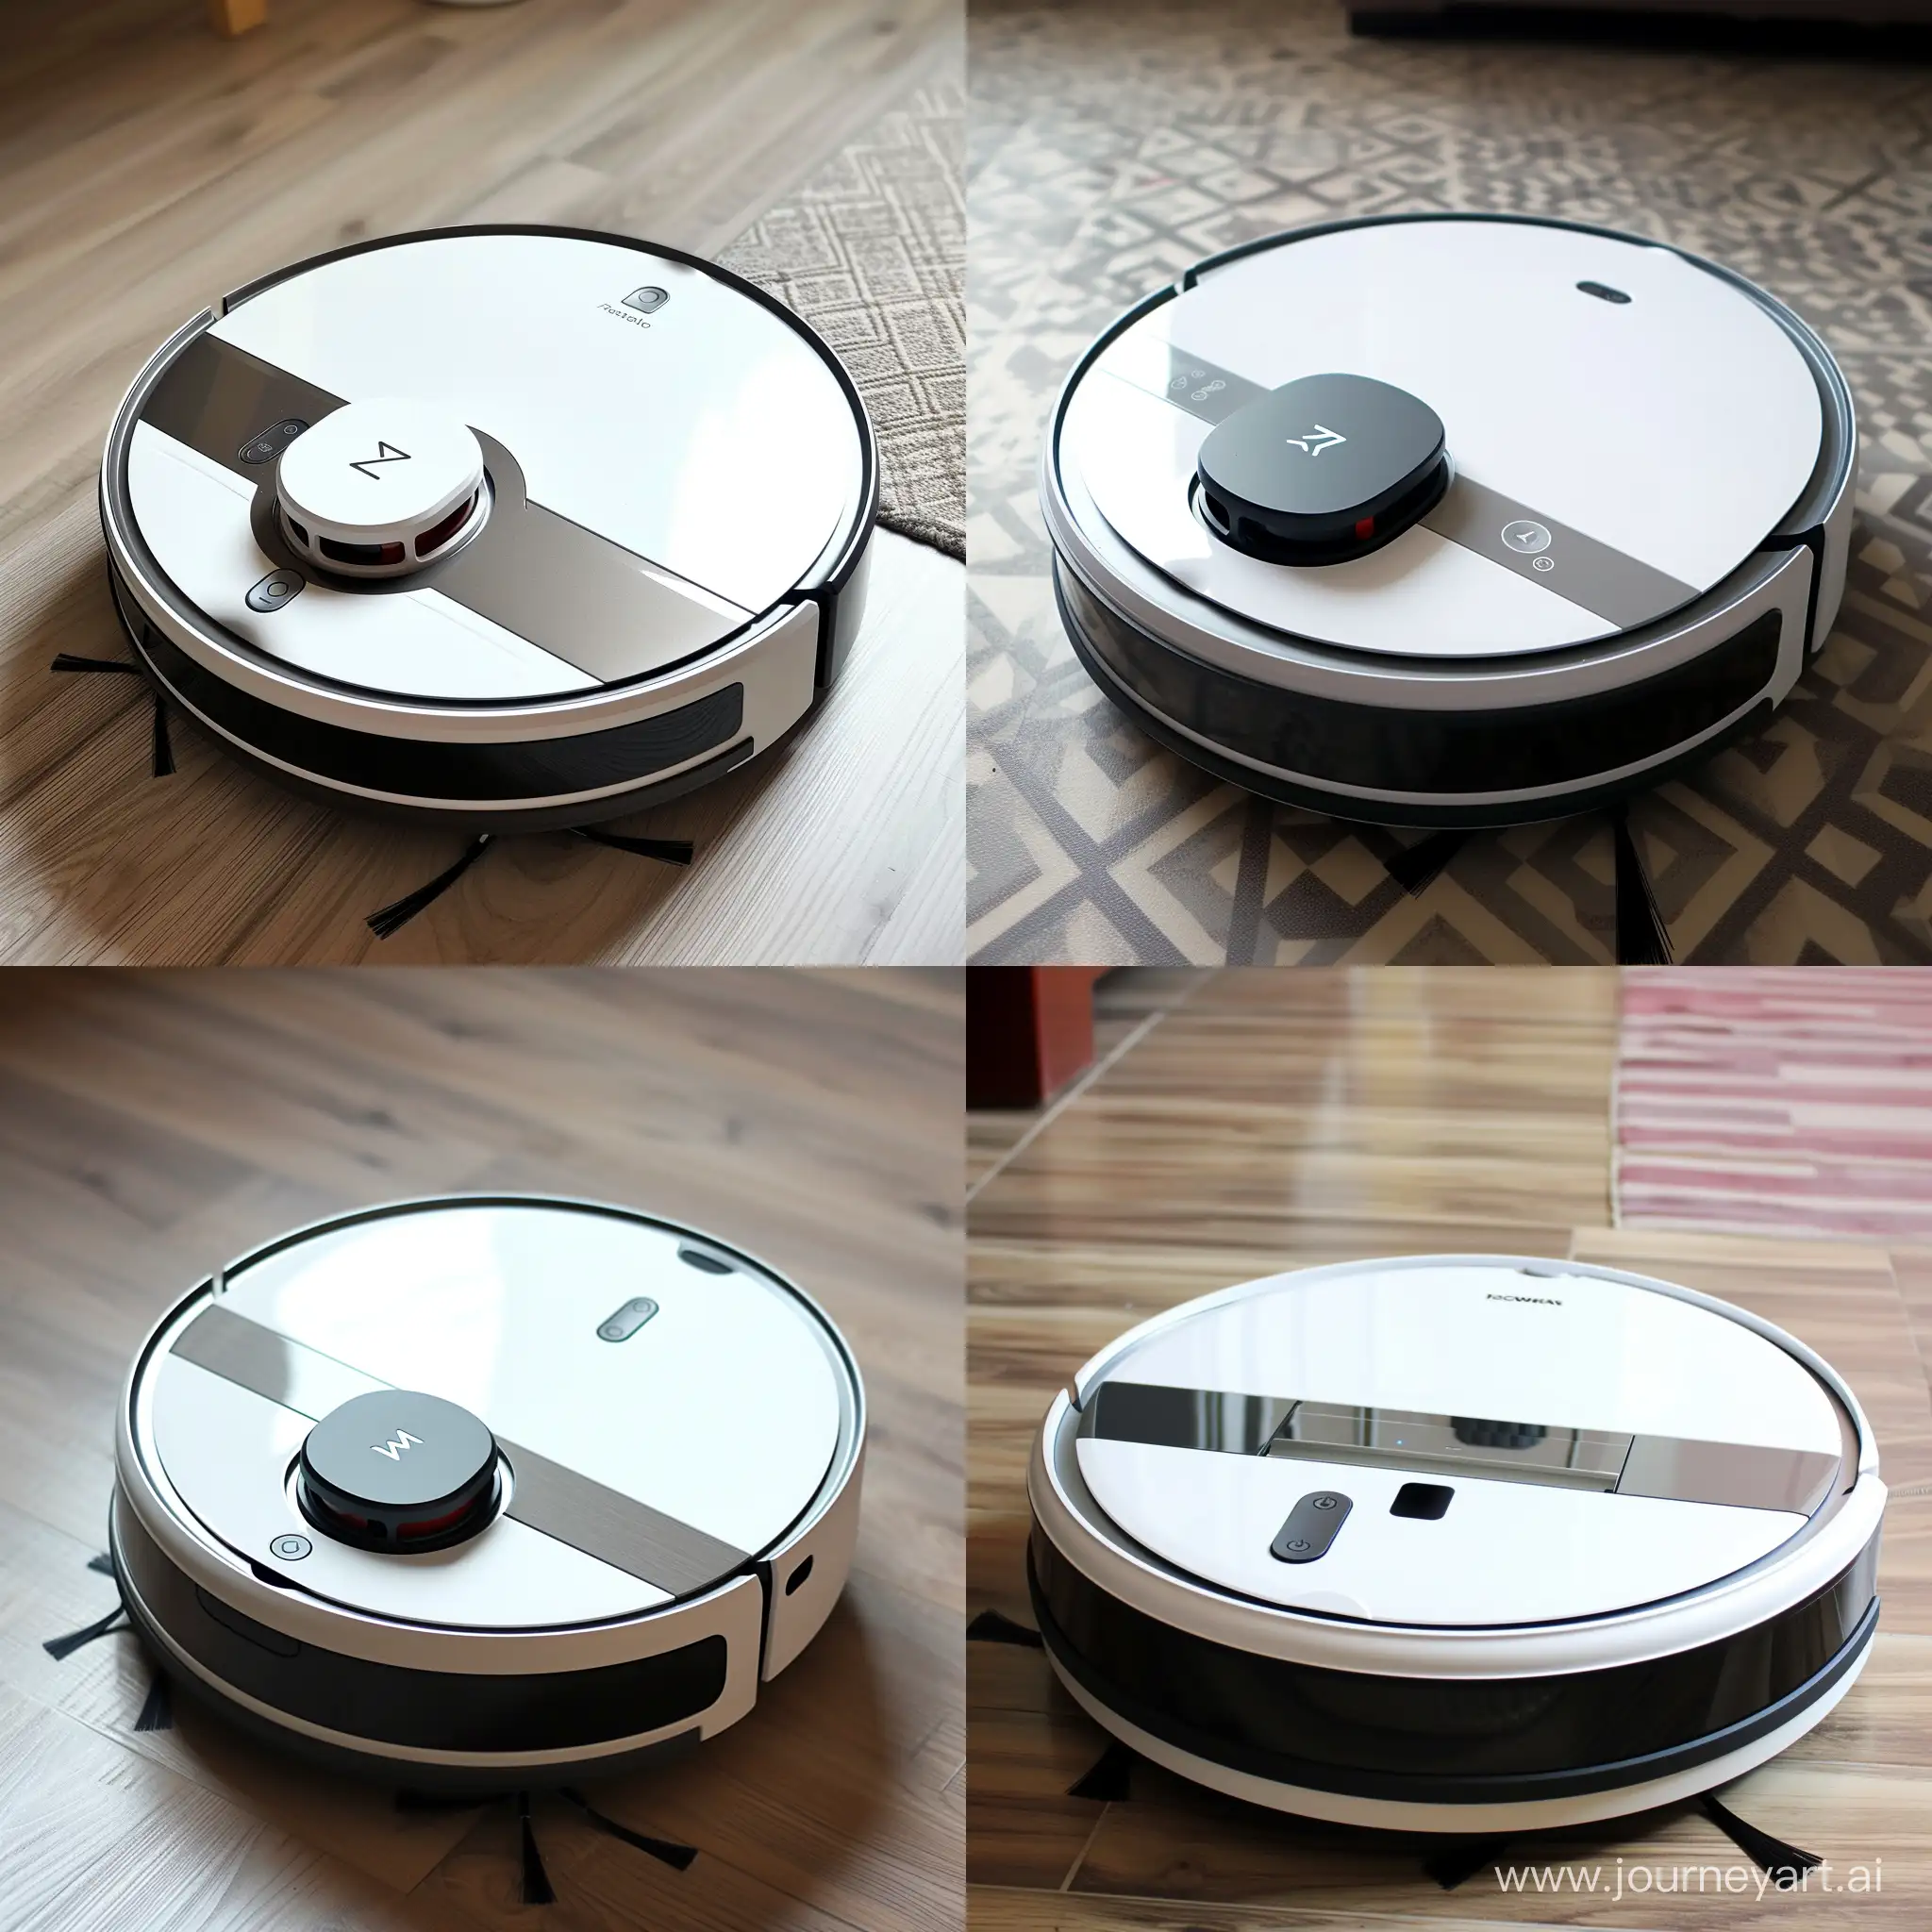 Automated-Cleaning-Robot-Vacuum-Sucks-Numbers-in-a-Symmetrical-Frame